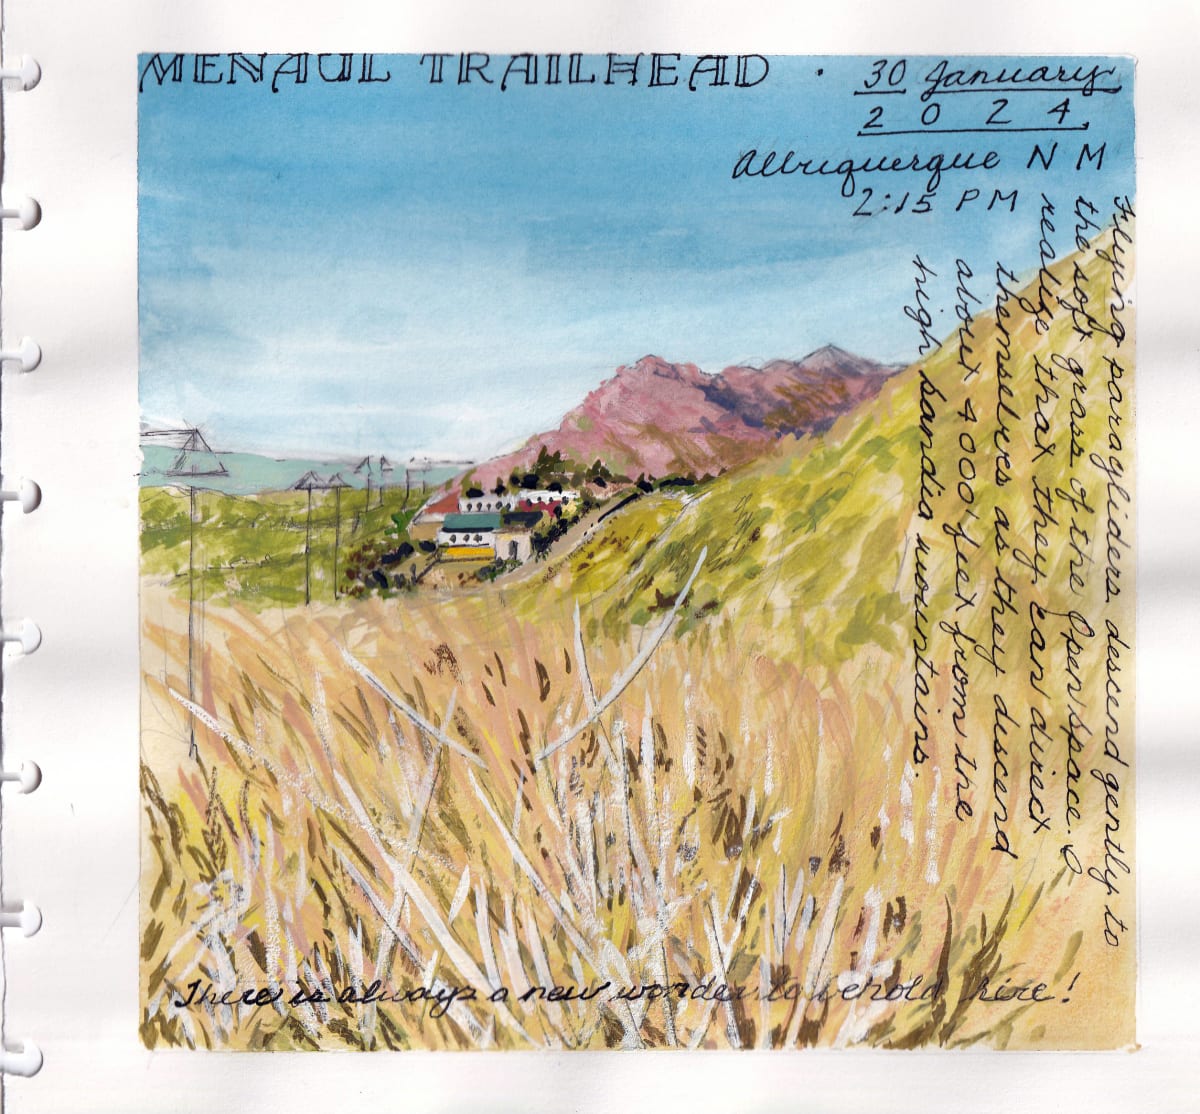 Journey Daybook Page by Margaret Pulis Herrick (Peggy)  Image: Menaul Trailhead